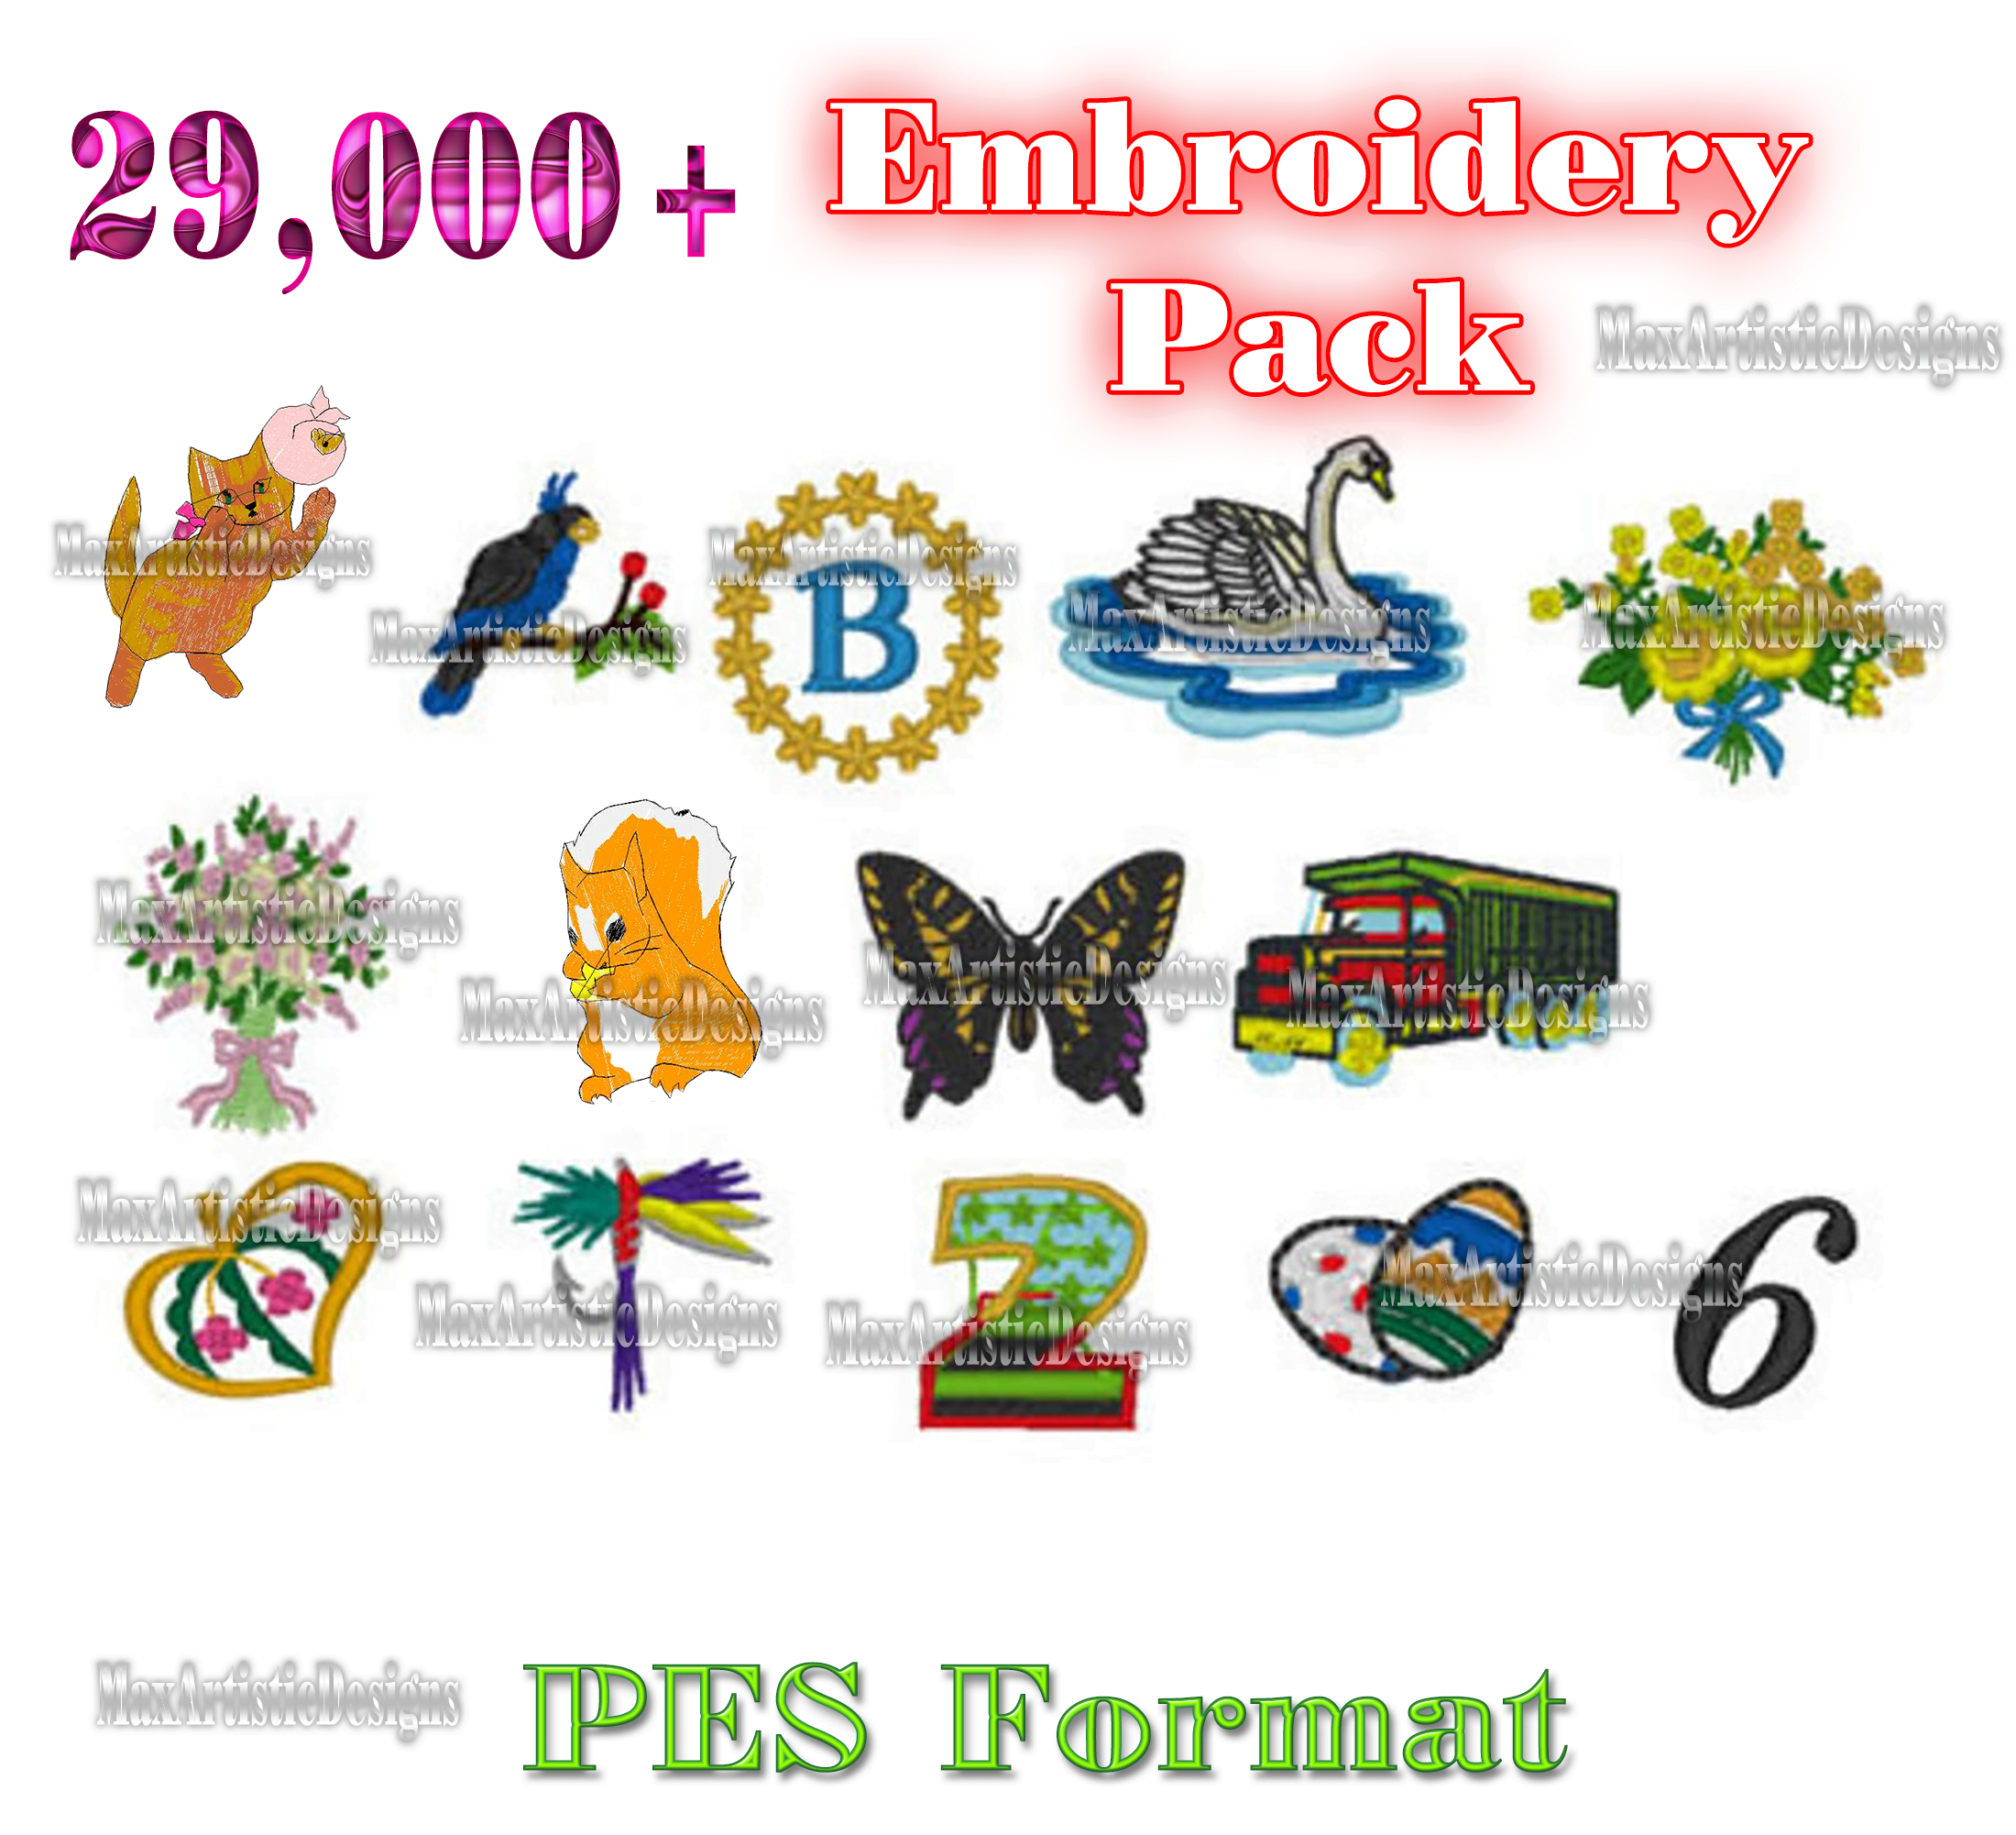 31.000+ embroidery kit featuring animals, fonts, holidays design patterns download